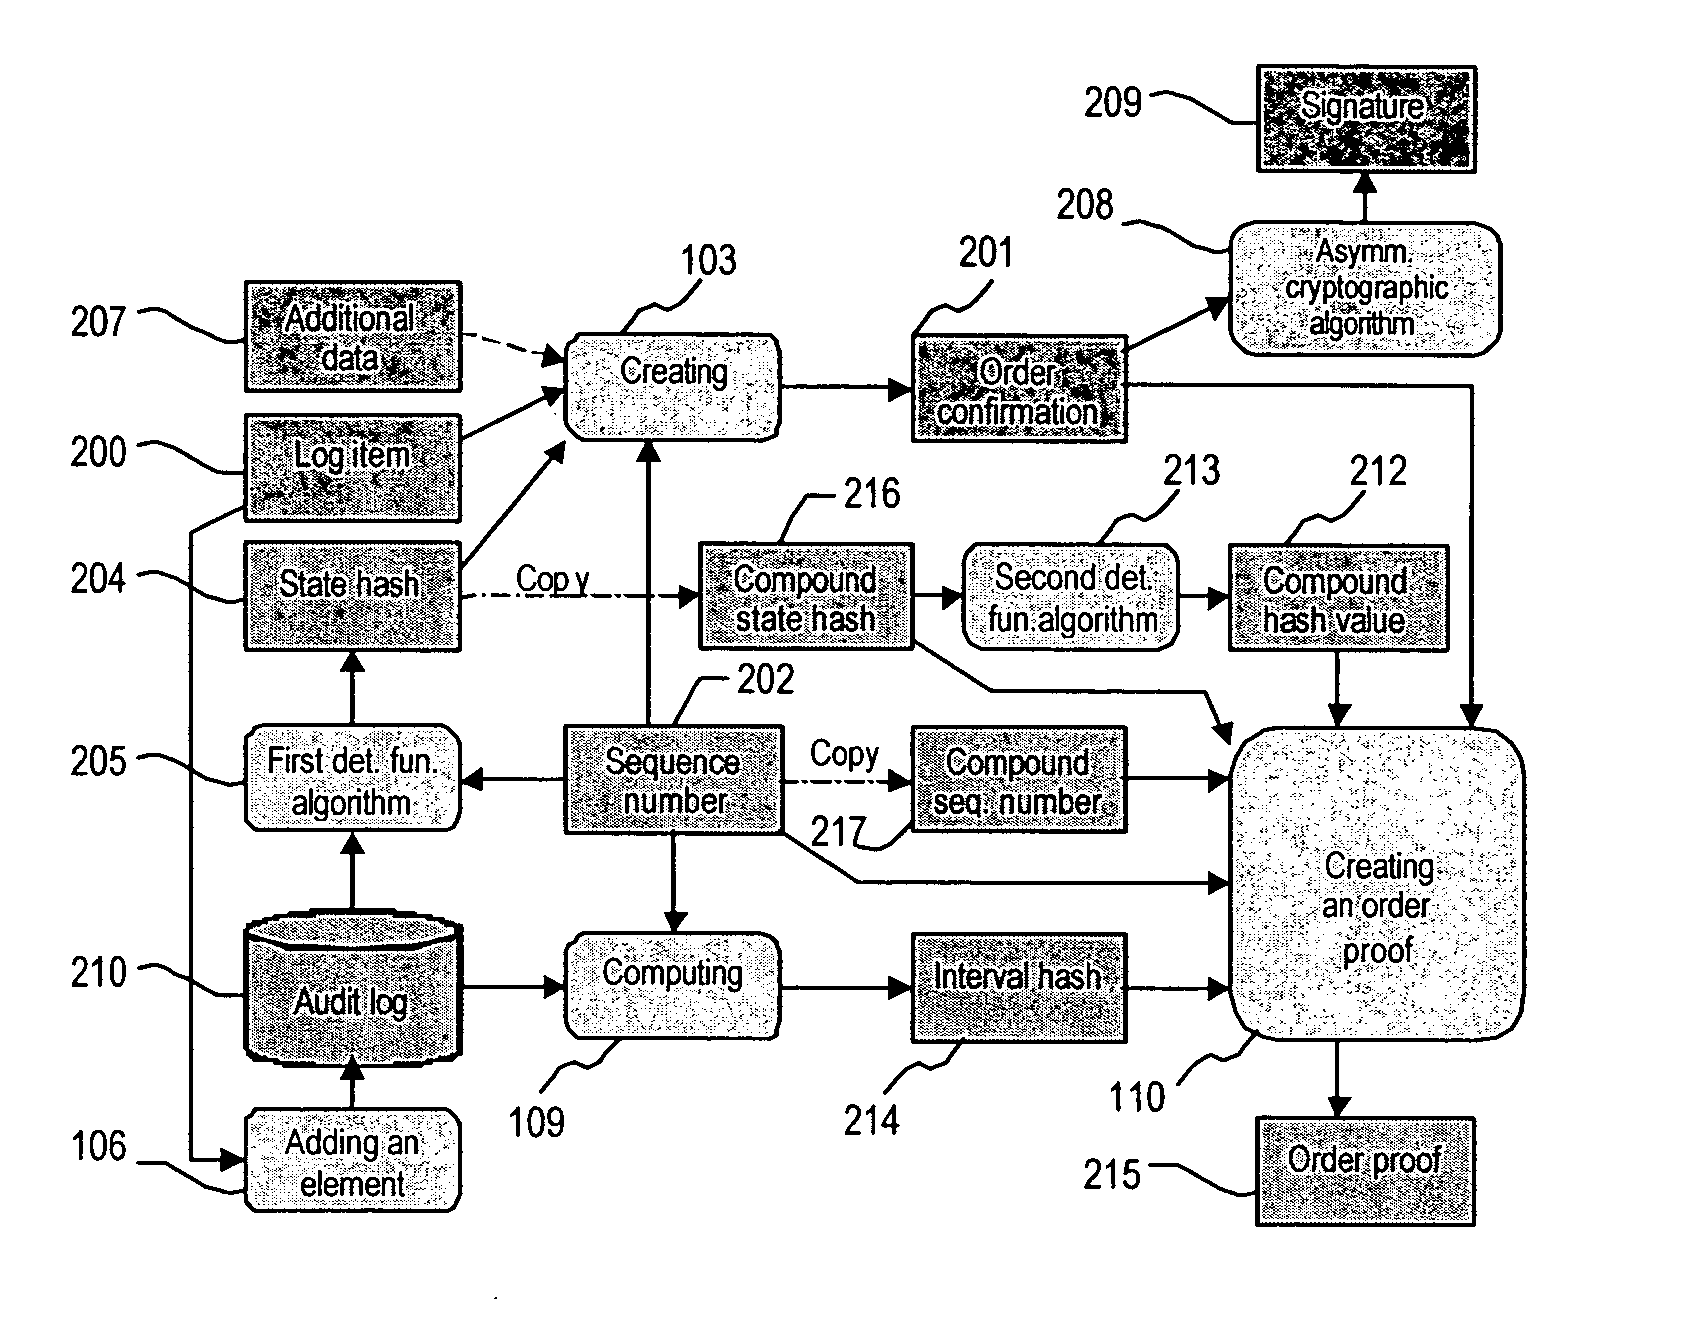 System and method for generating a digital certificate